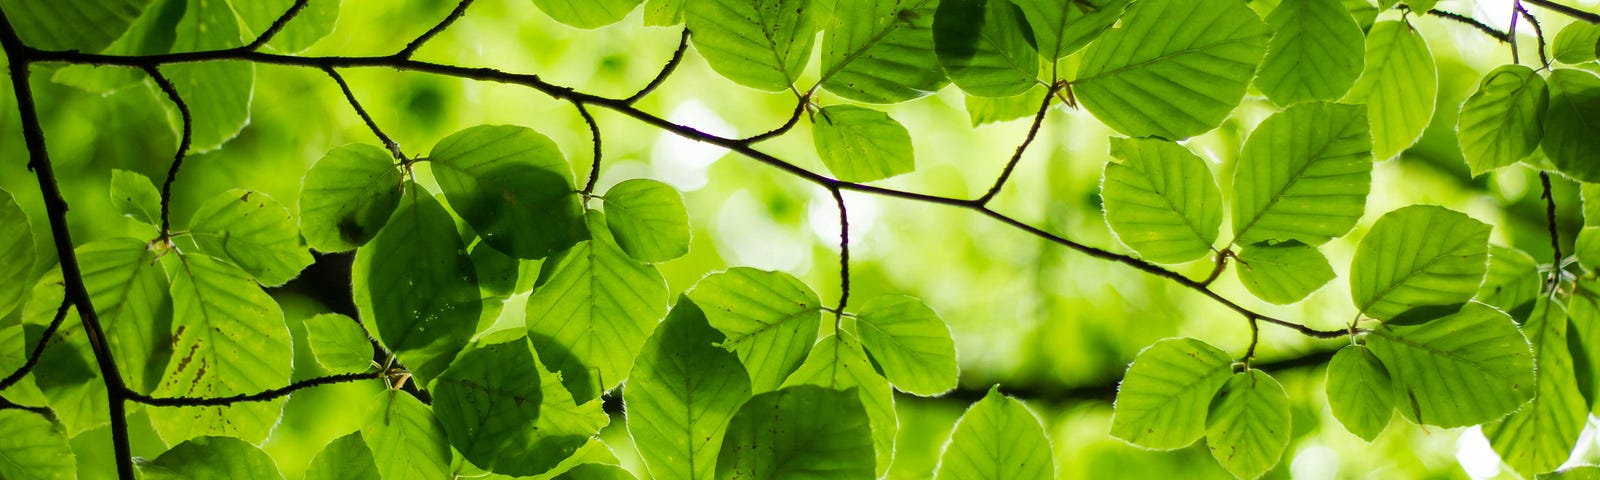 Close-up of green leaves on a tree.